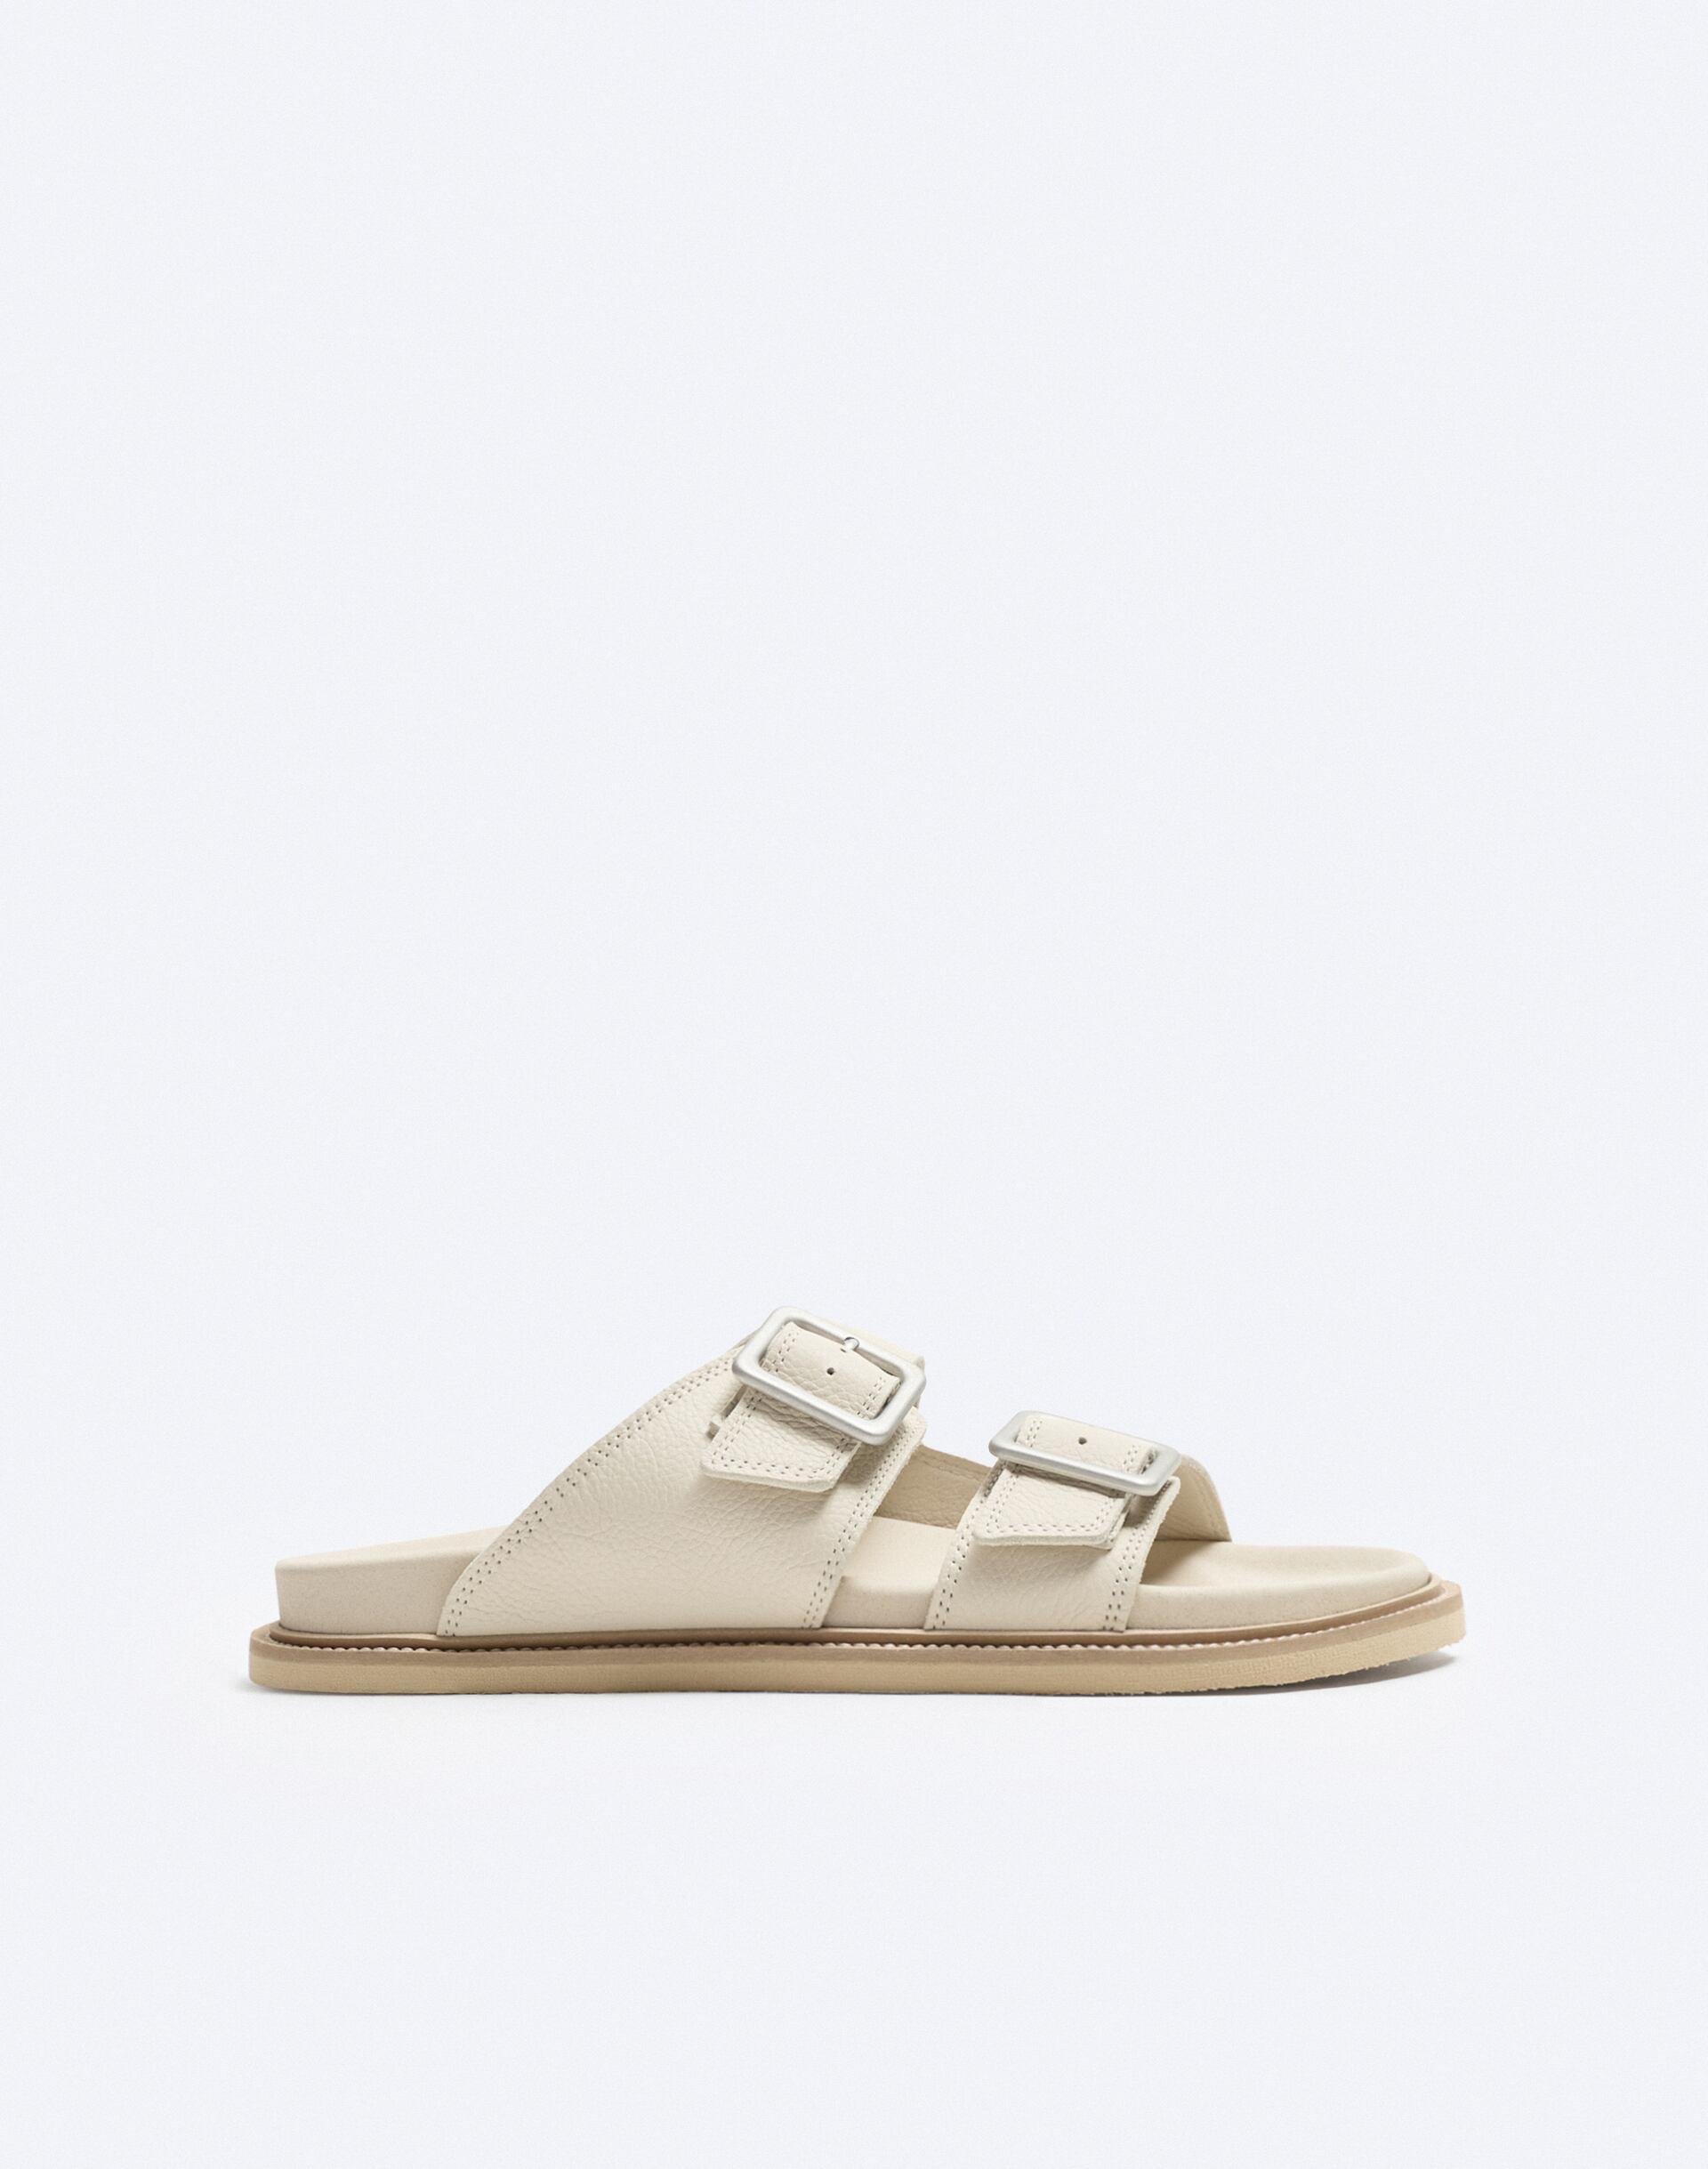 LEATHER SANDALS WITH BUCKLES by ZARA